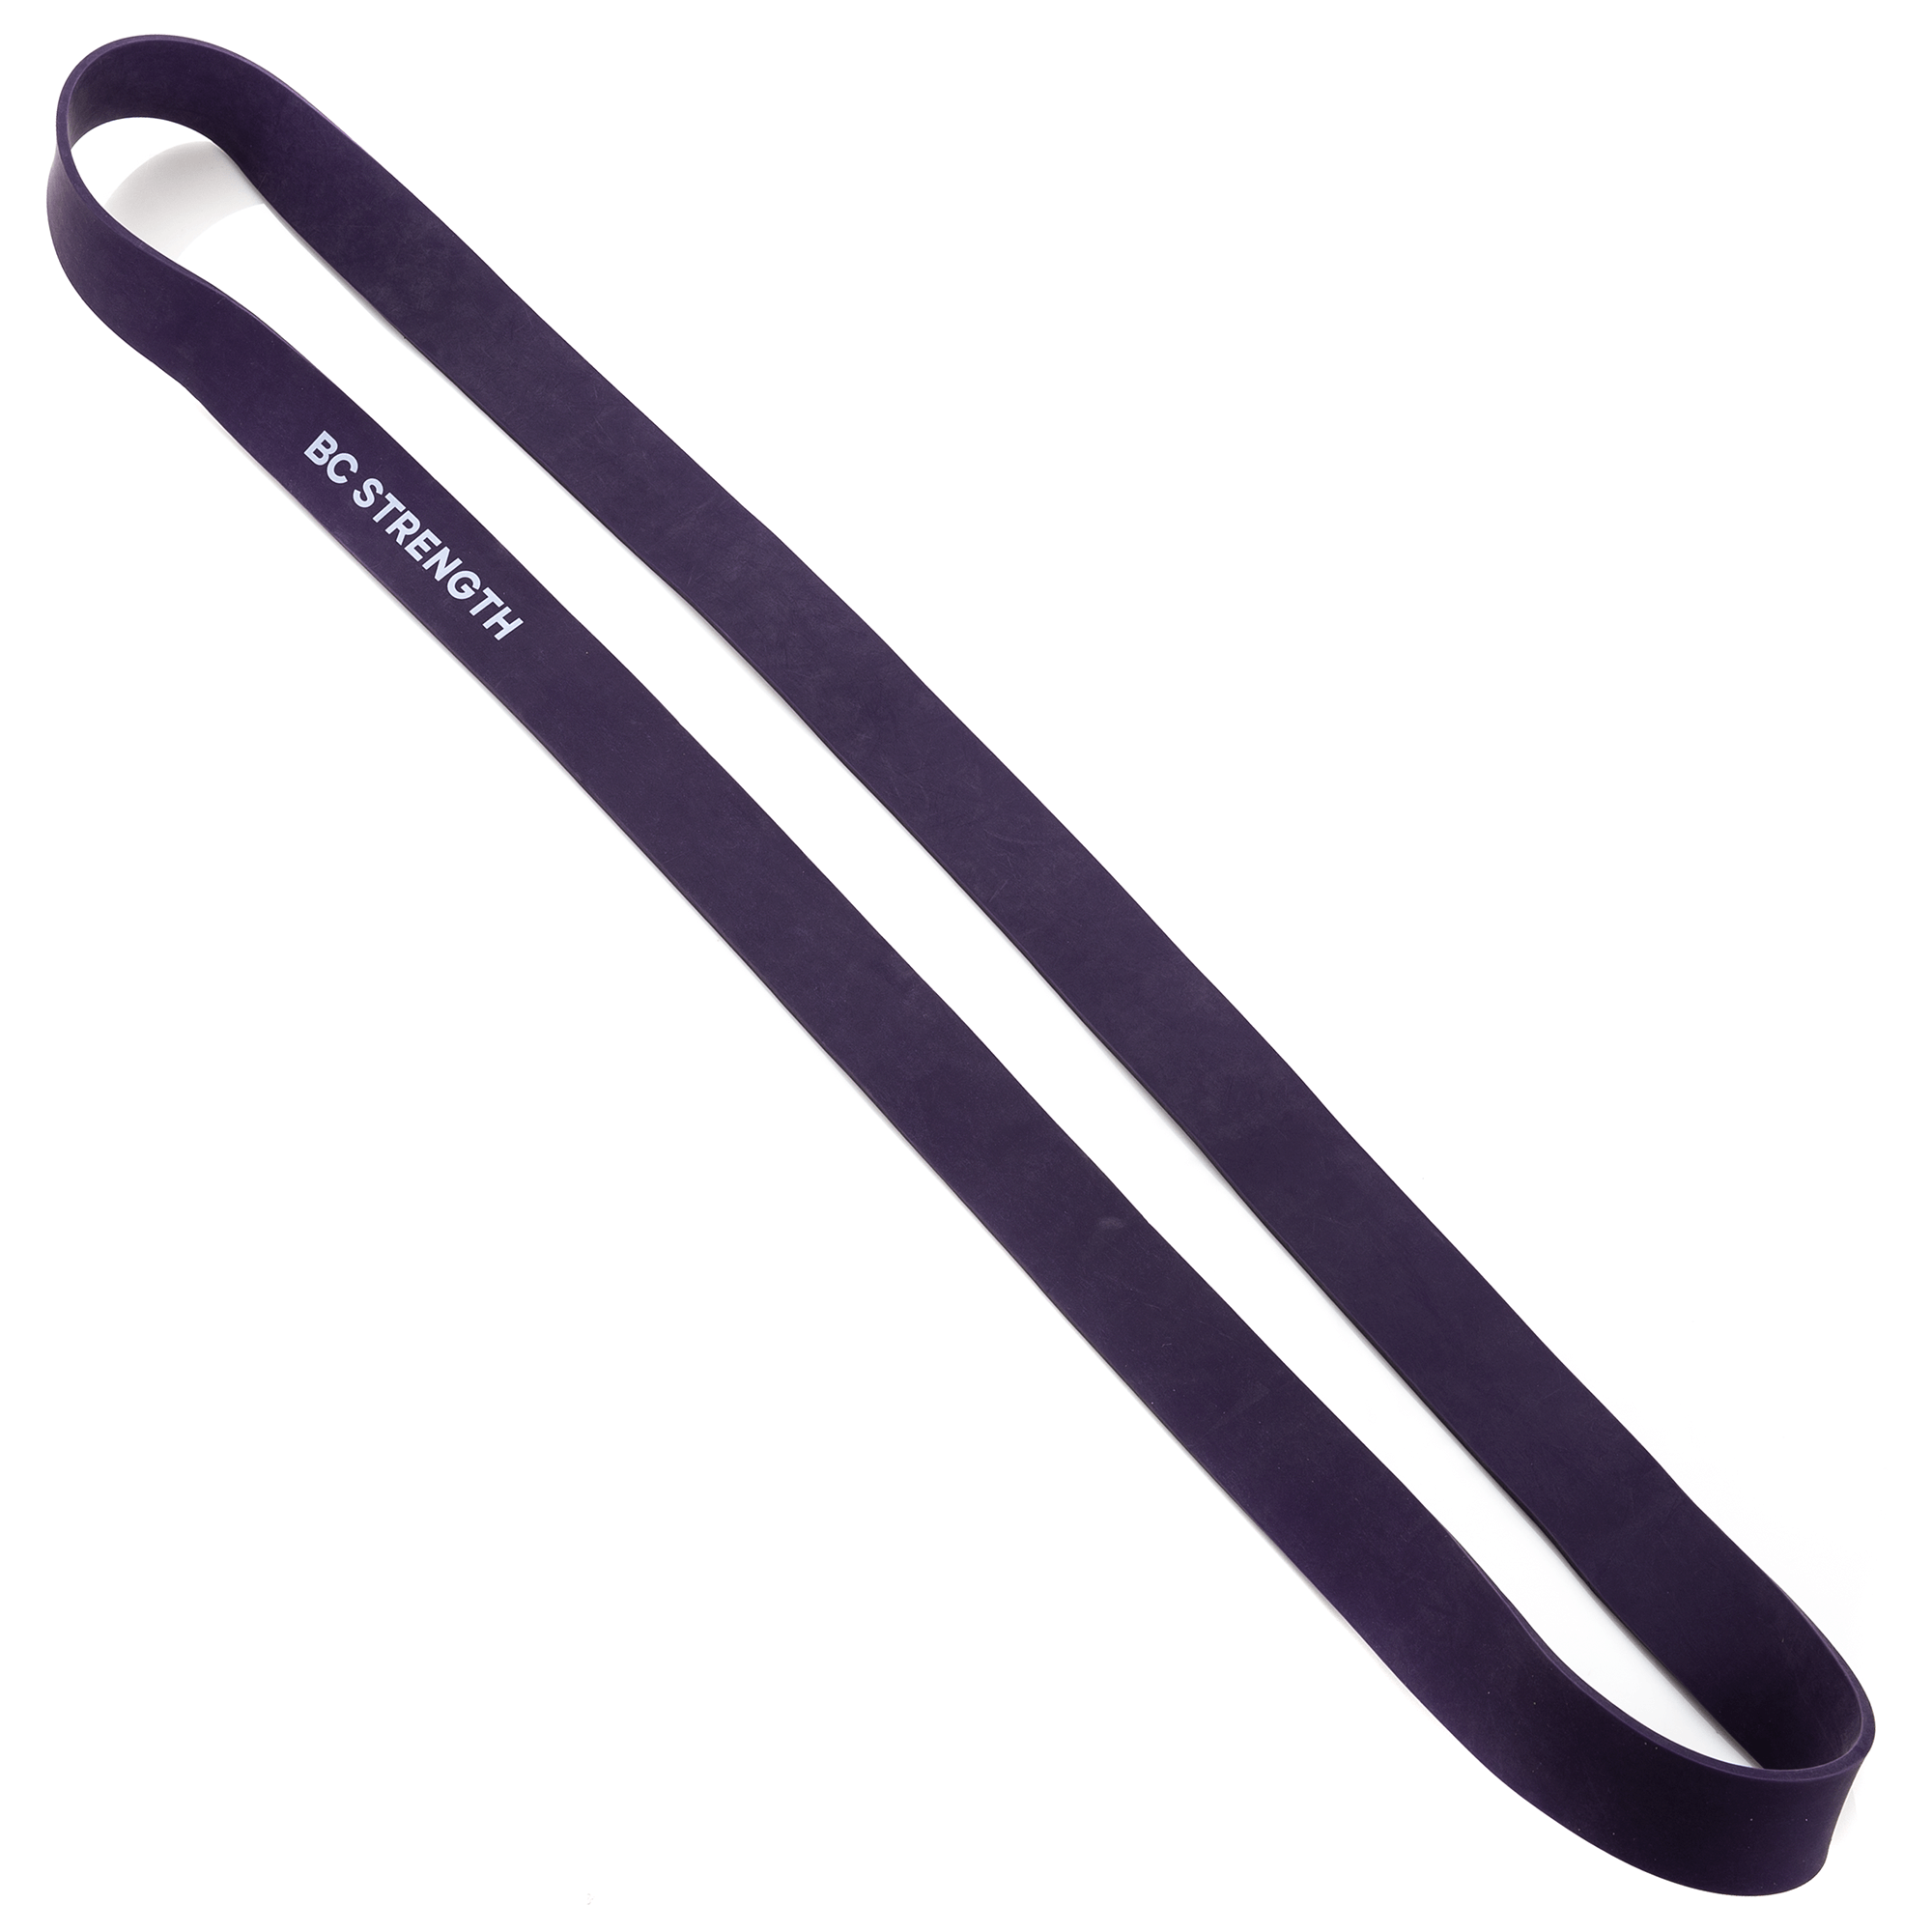 Resistance Band (fitness product) - Bret Contreras